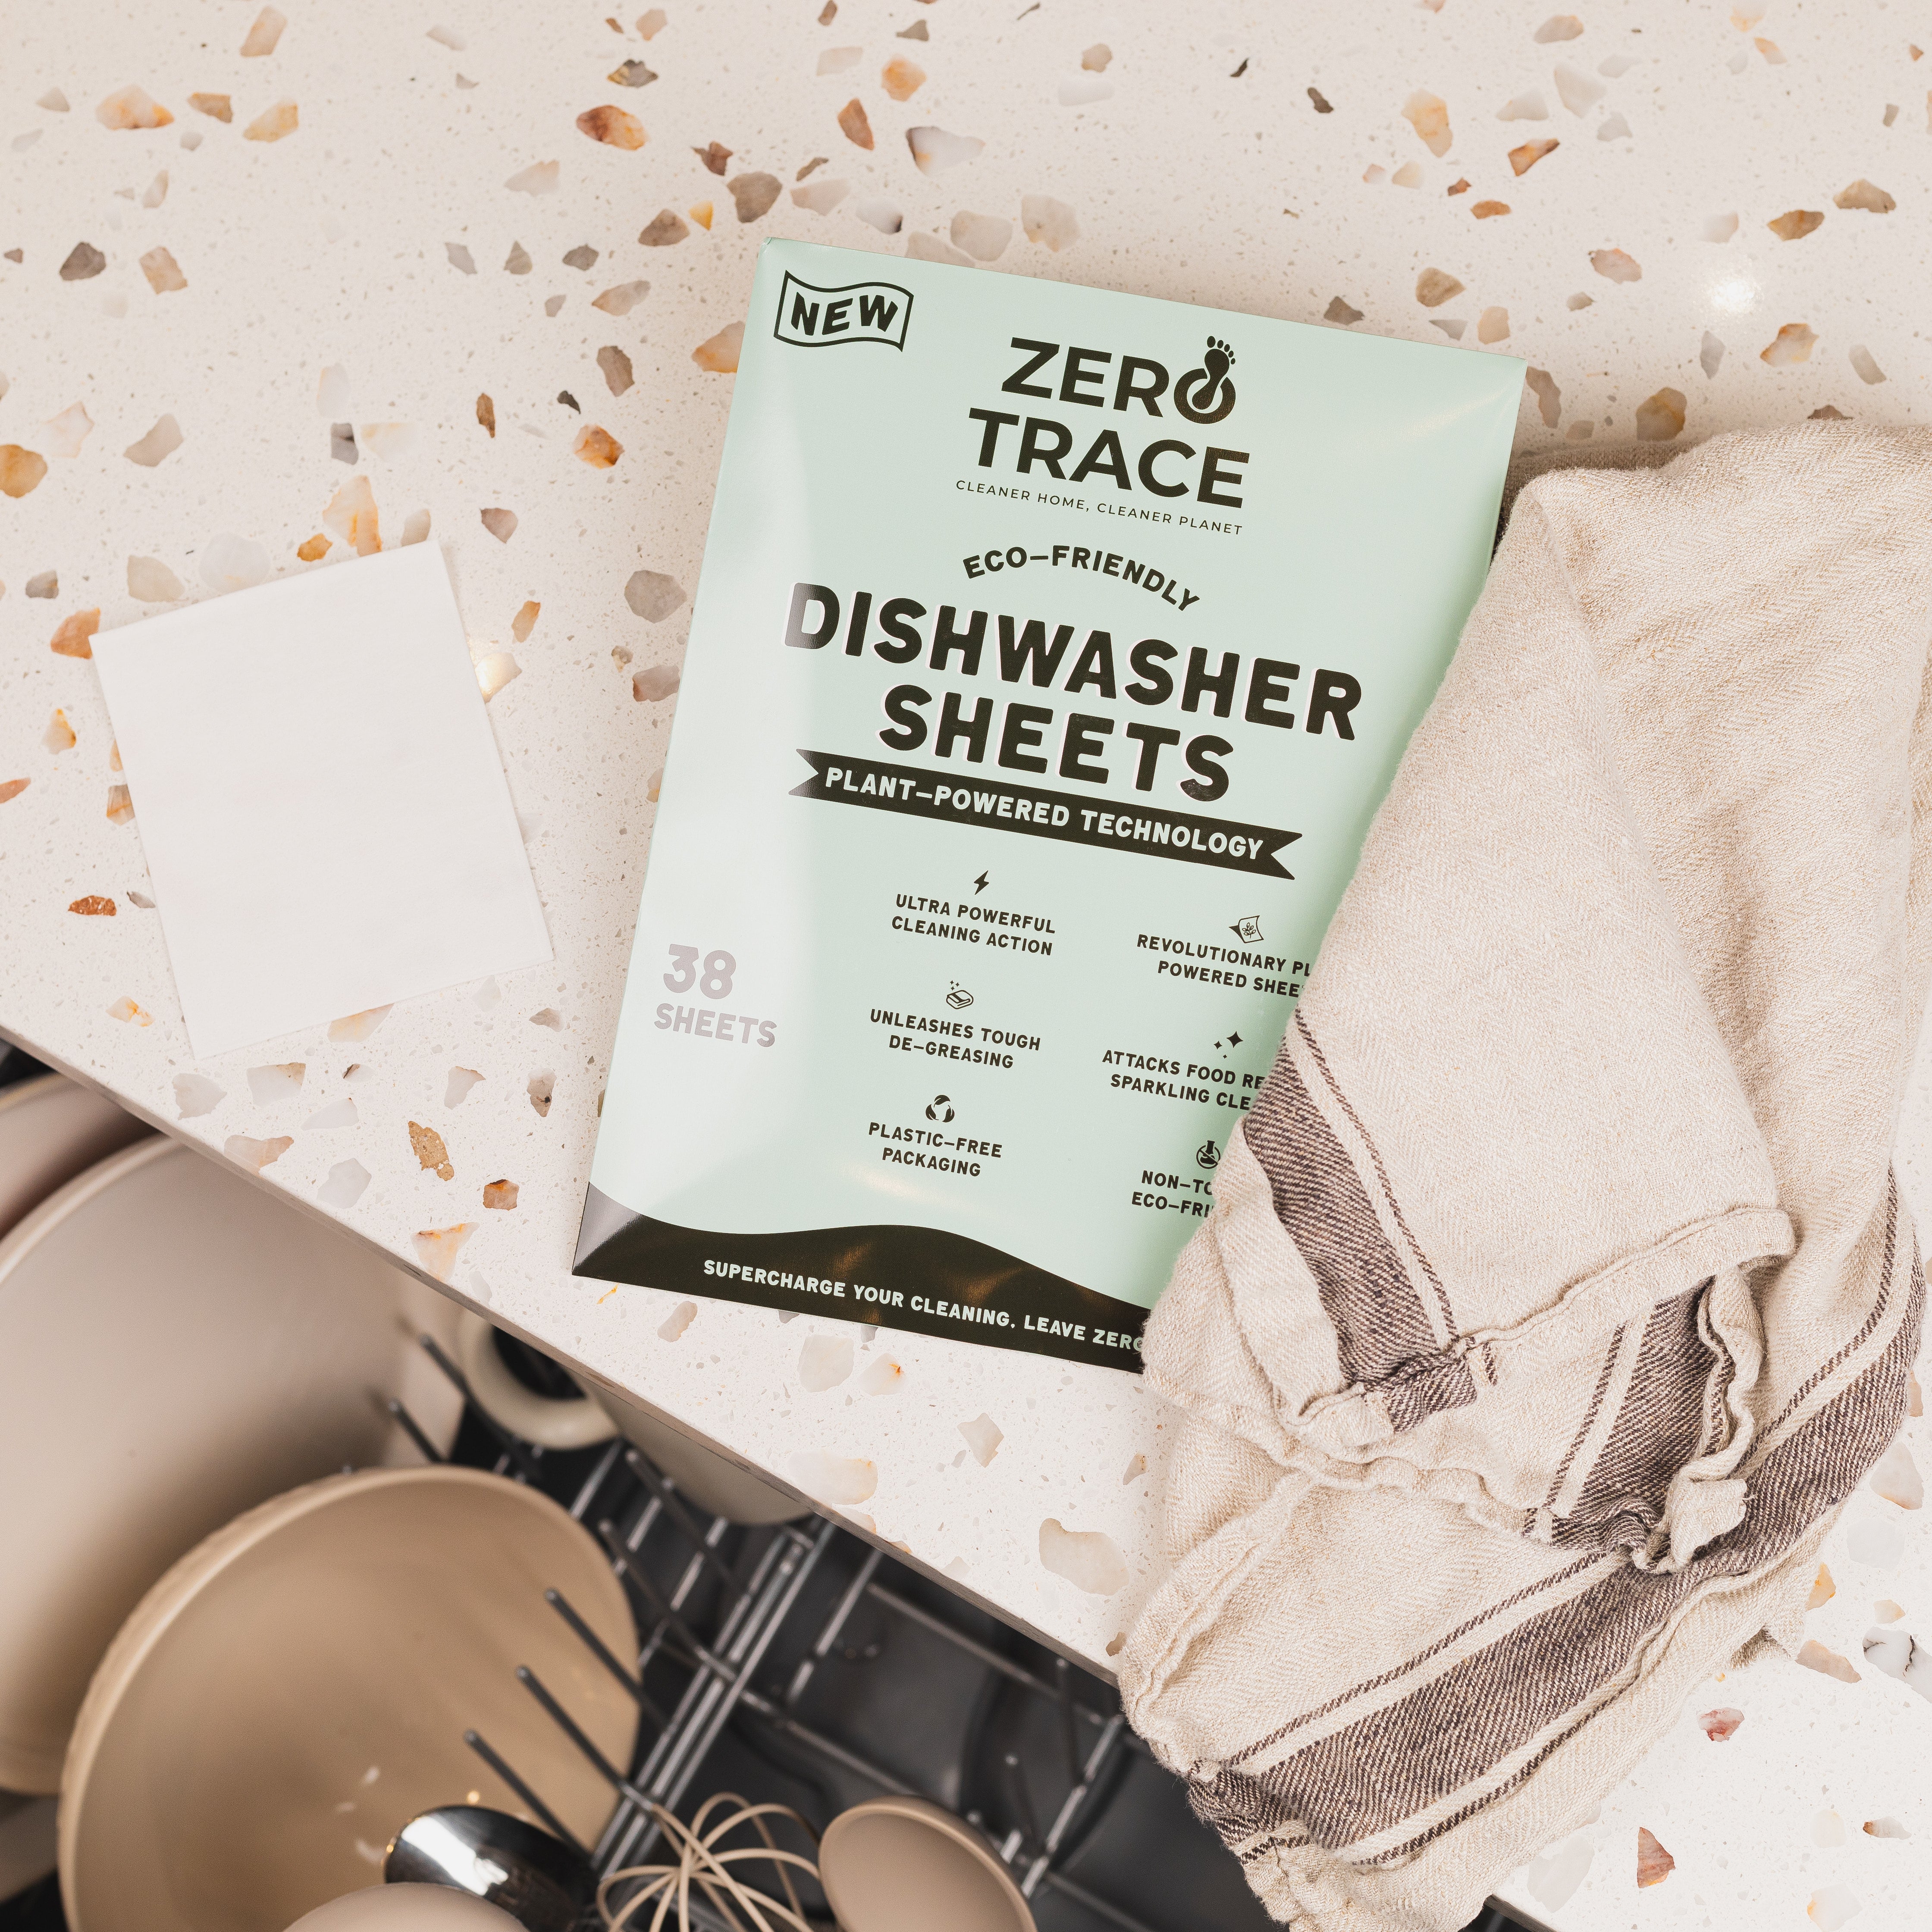 Zero Trace Dish Washer Sheets are a convenient and effortless solution for dish washing.